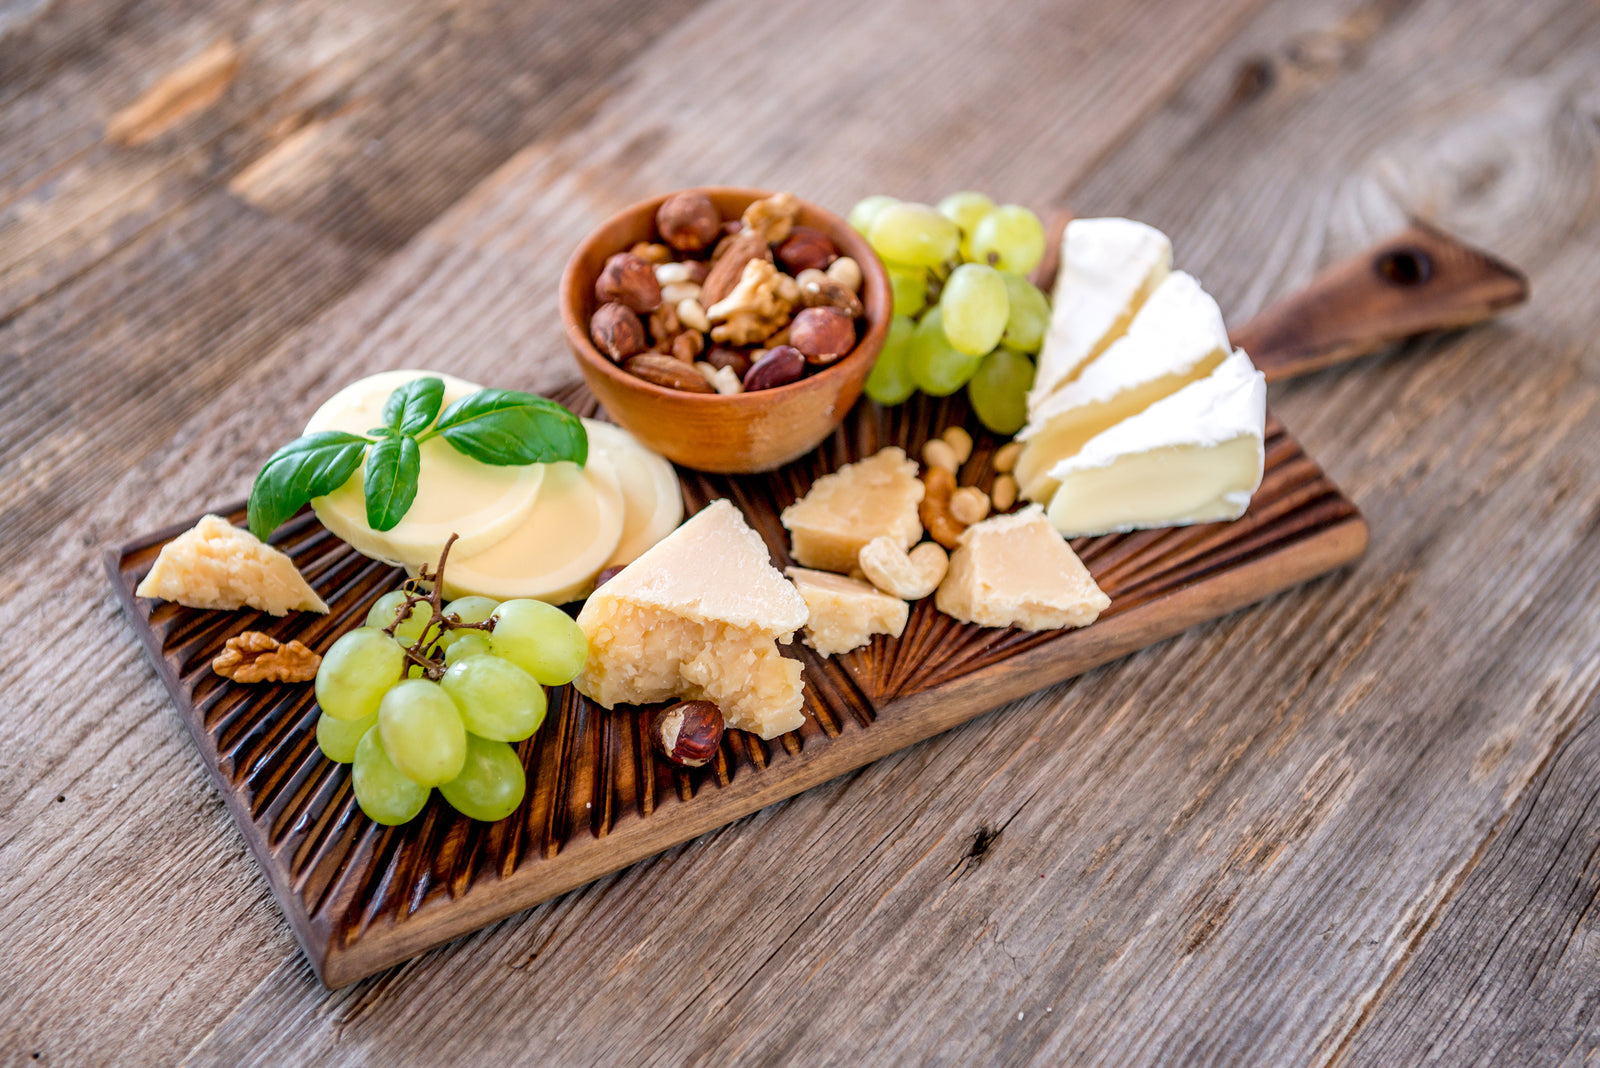 Go Nuts for National Wine and Cheese Day